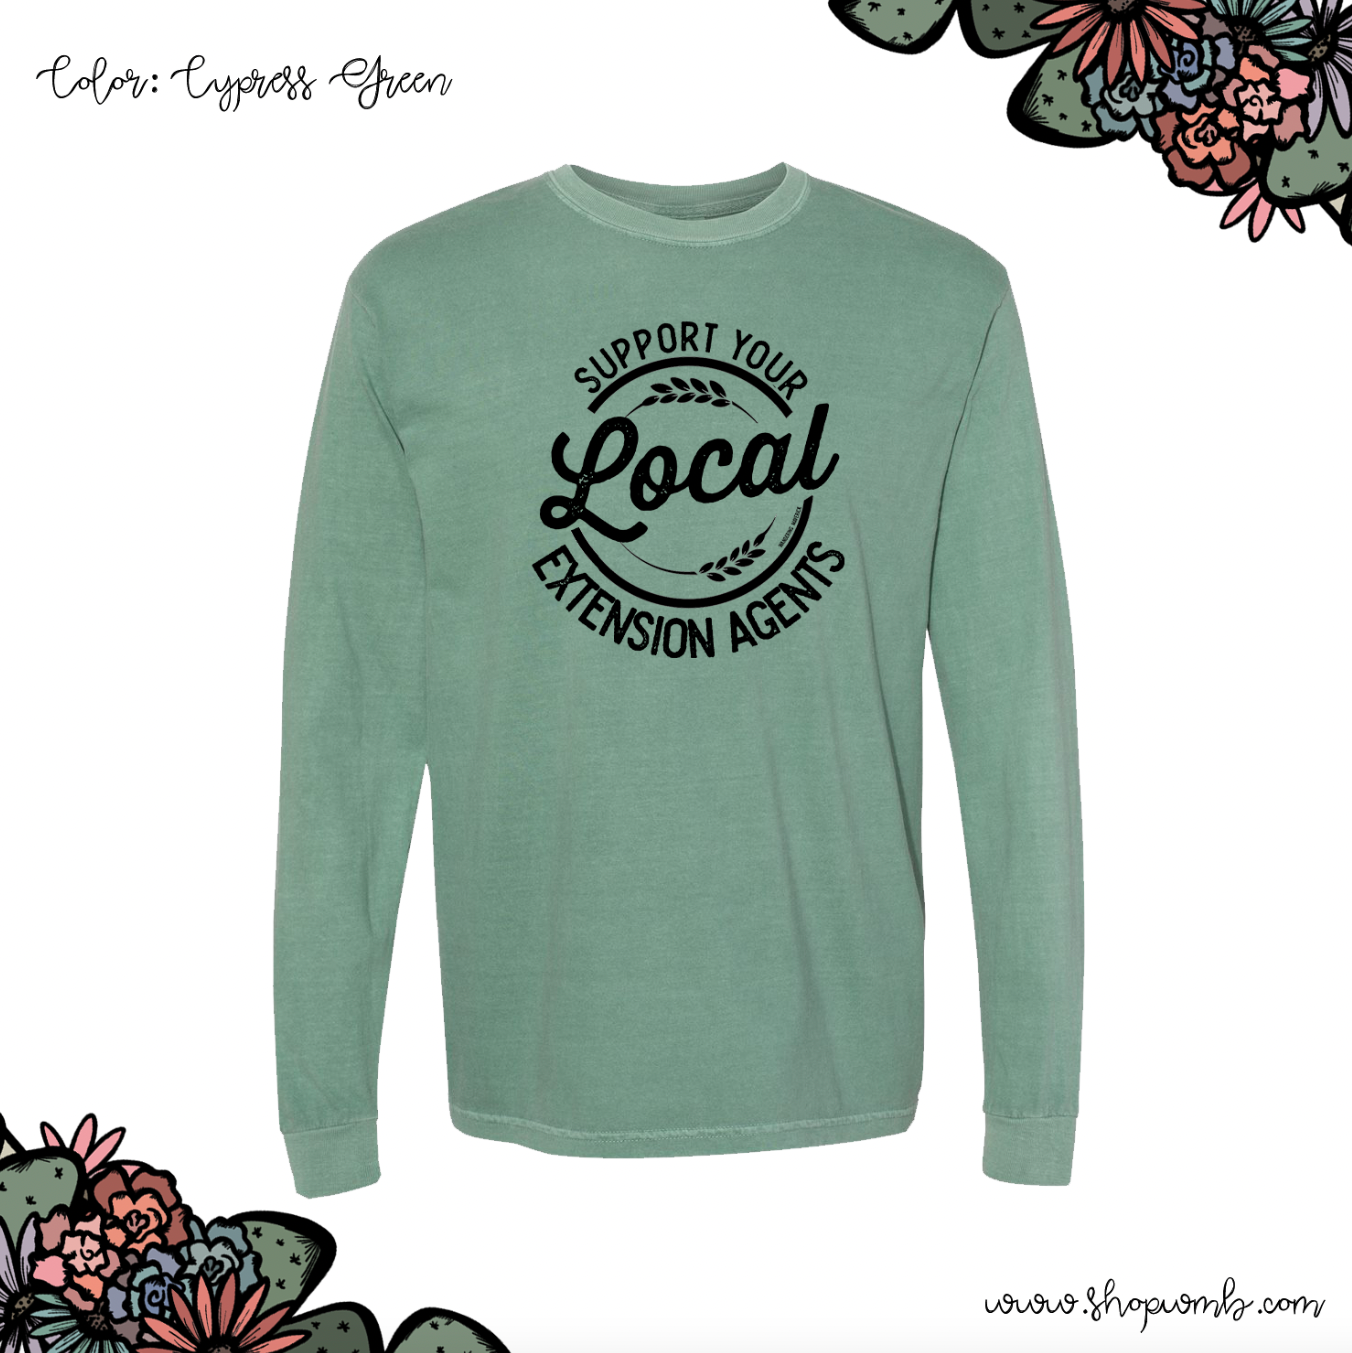 Round Support Your Local Extension Agents LONG SLEEVE T-Shirt (S-3XL) - Multiple Colors!